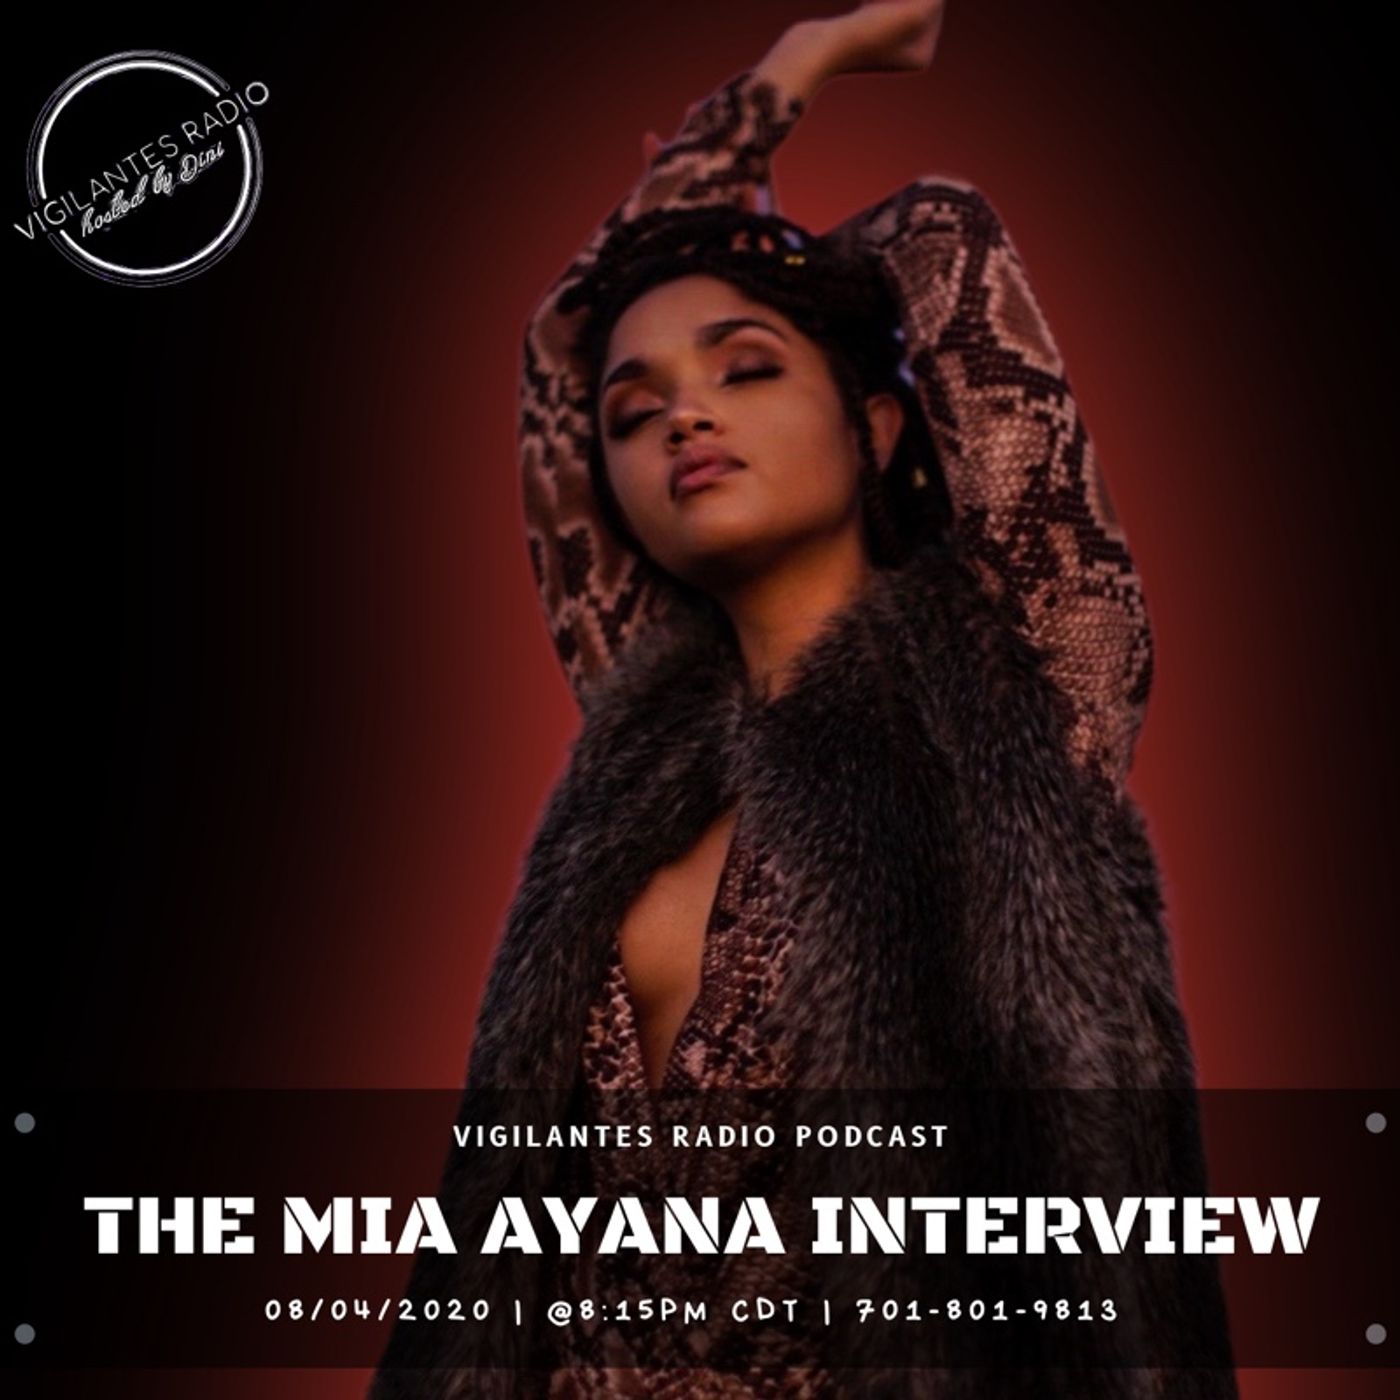 The Mia Ayana Interview. Image